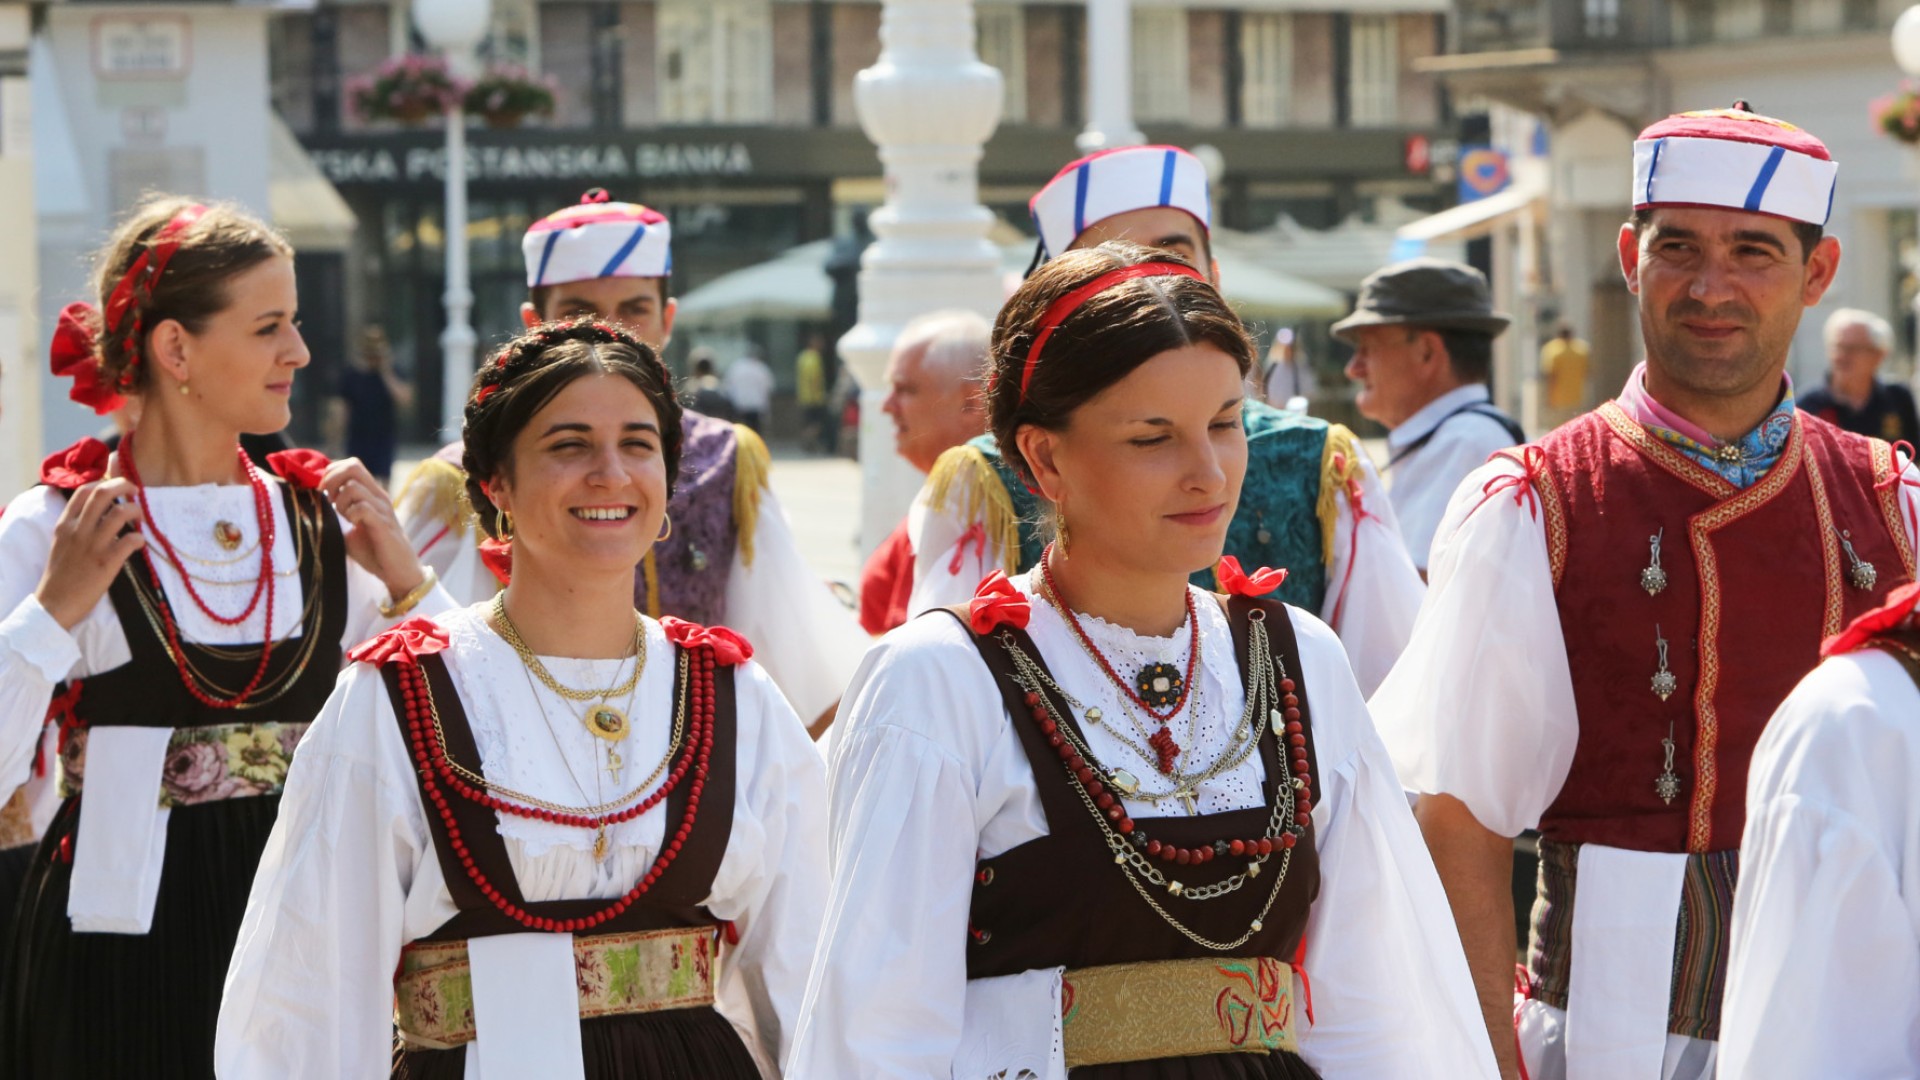 Local Croatians dressed in traditional clothing in the streets of Croatia